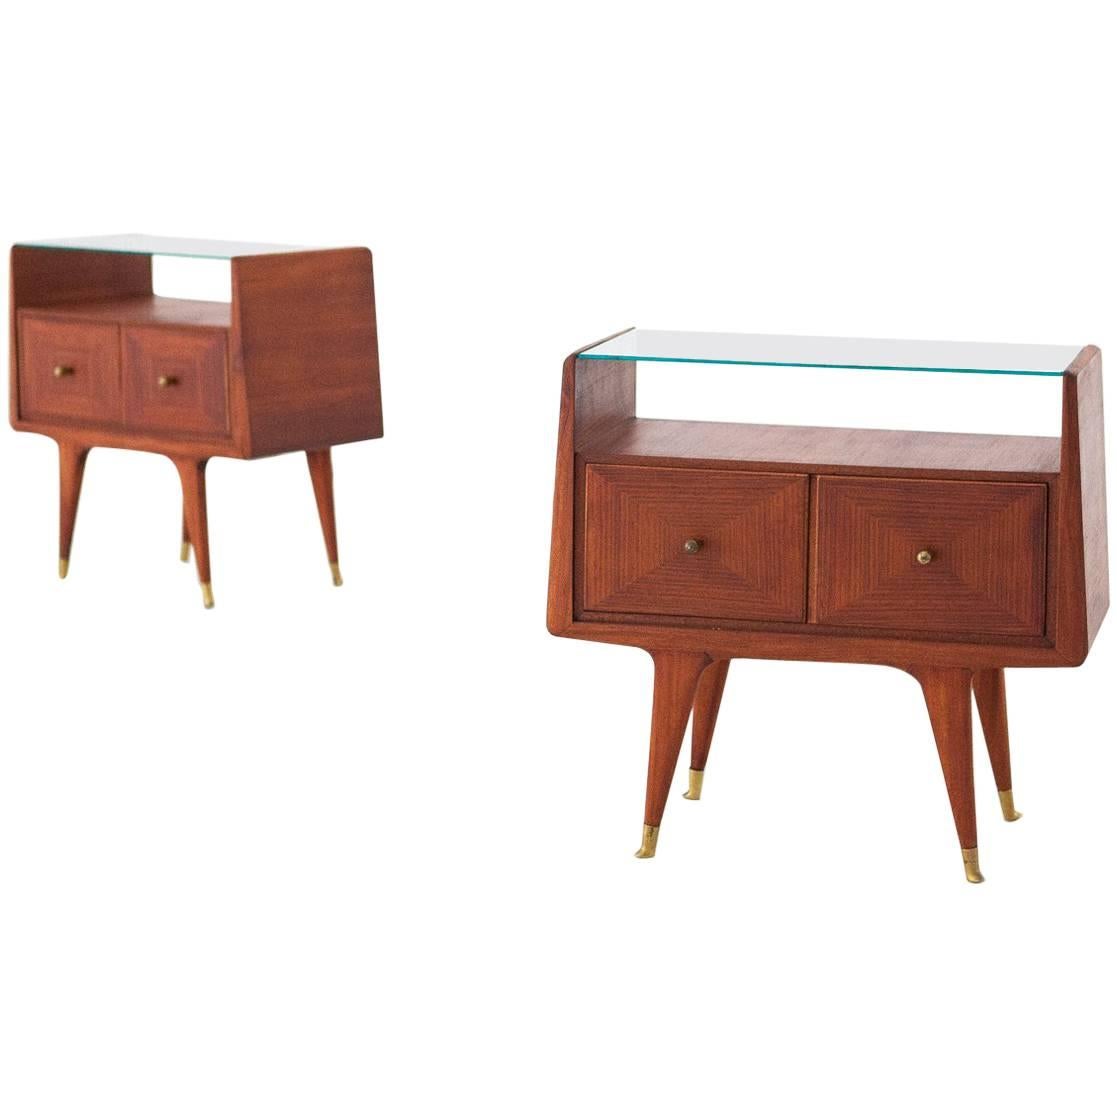 Italian Mid-Century Modern Brass and Mahogany Bedside Tables Nightstands, 1950s